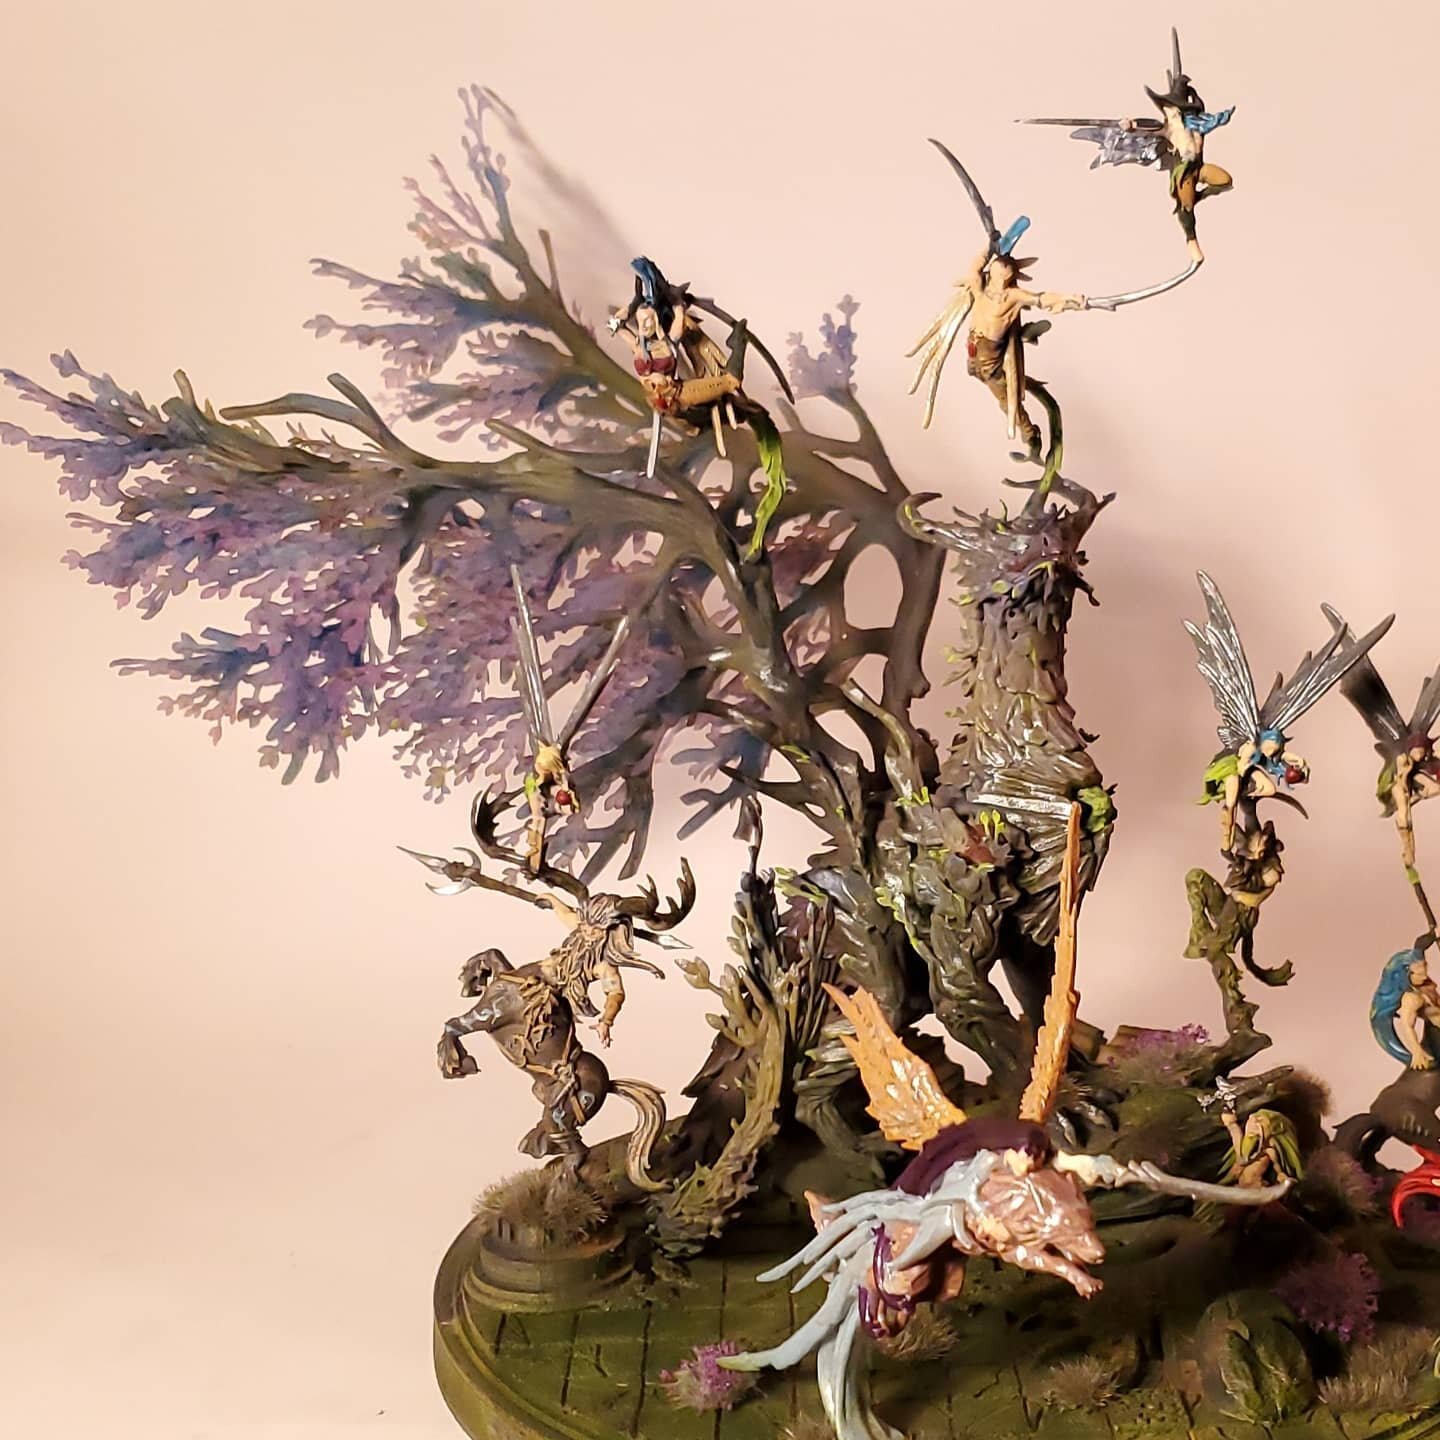 Just finished this diorama up. Man I love this hobby. Been in support hell for the last two weeks or I'd have done more personal painting and printing. #3dprinting #dragonart #dnd dragon is from @minimonstermayhem fey folk are from @ragingheroes and 